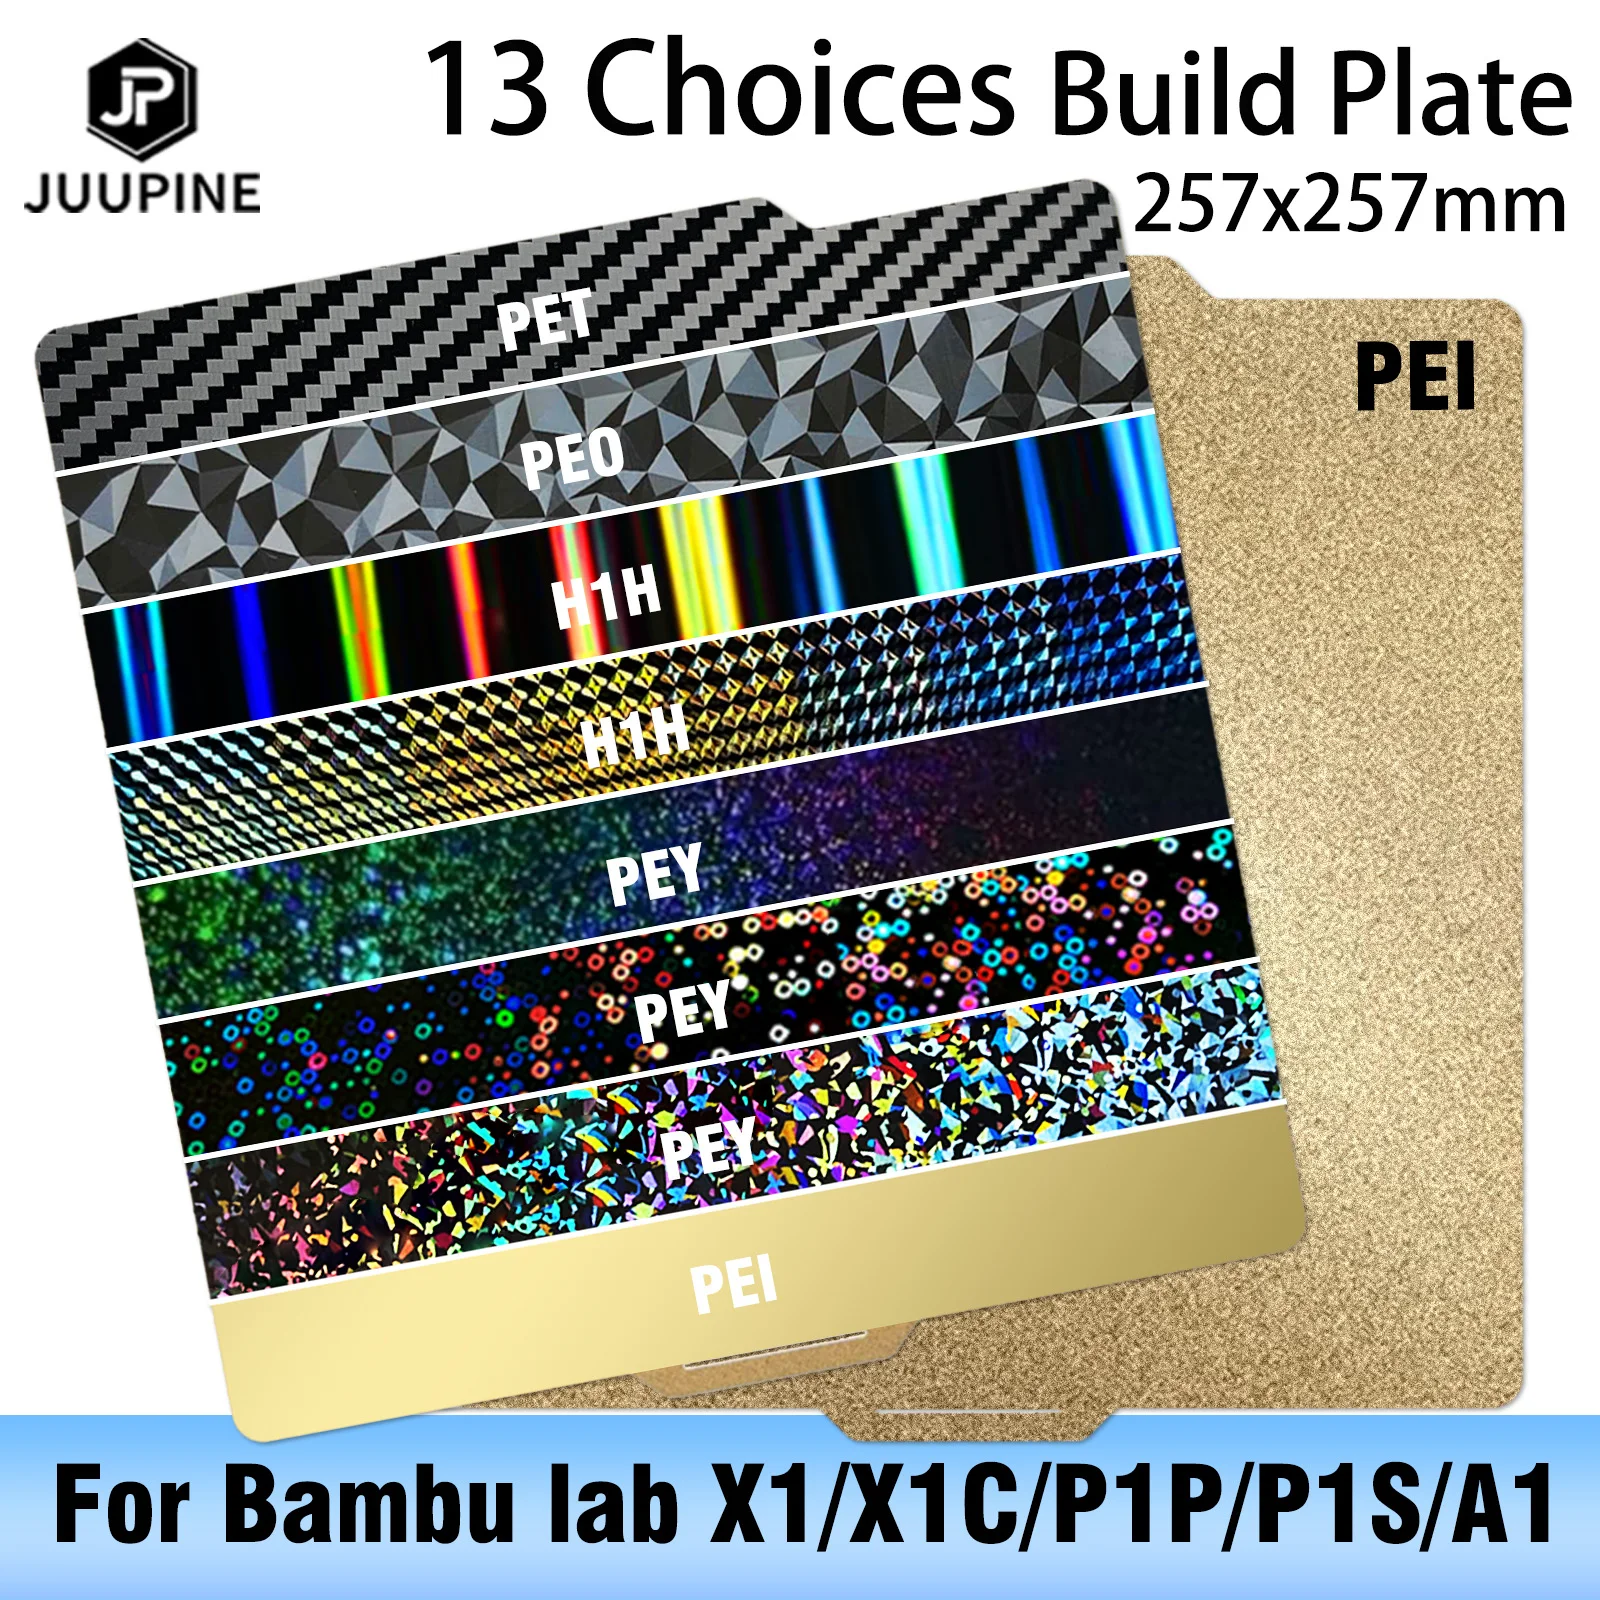 Juupine Holographic Pey Sheet For Bambu Lab Build Plate Pet Bambulab Pei Texture 257x257 Peo Sheet For P1S P1P Bamboo Heated Bed